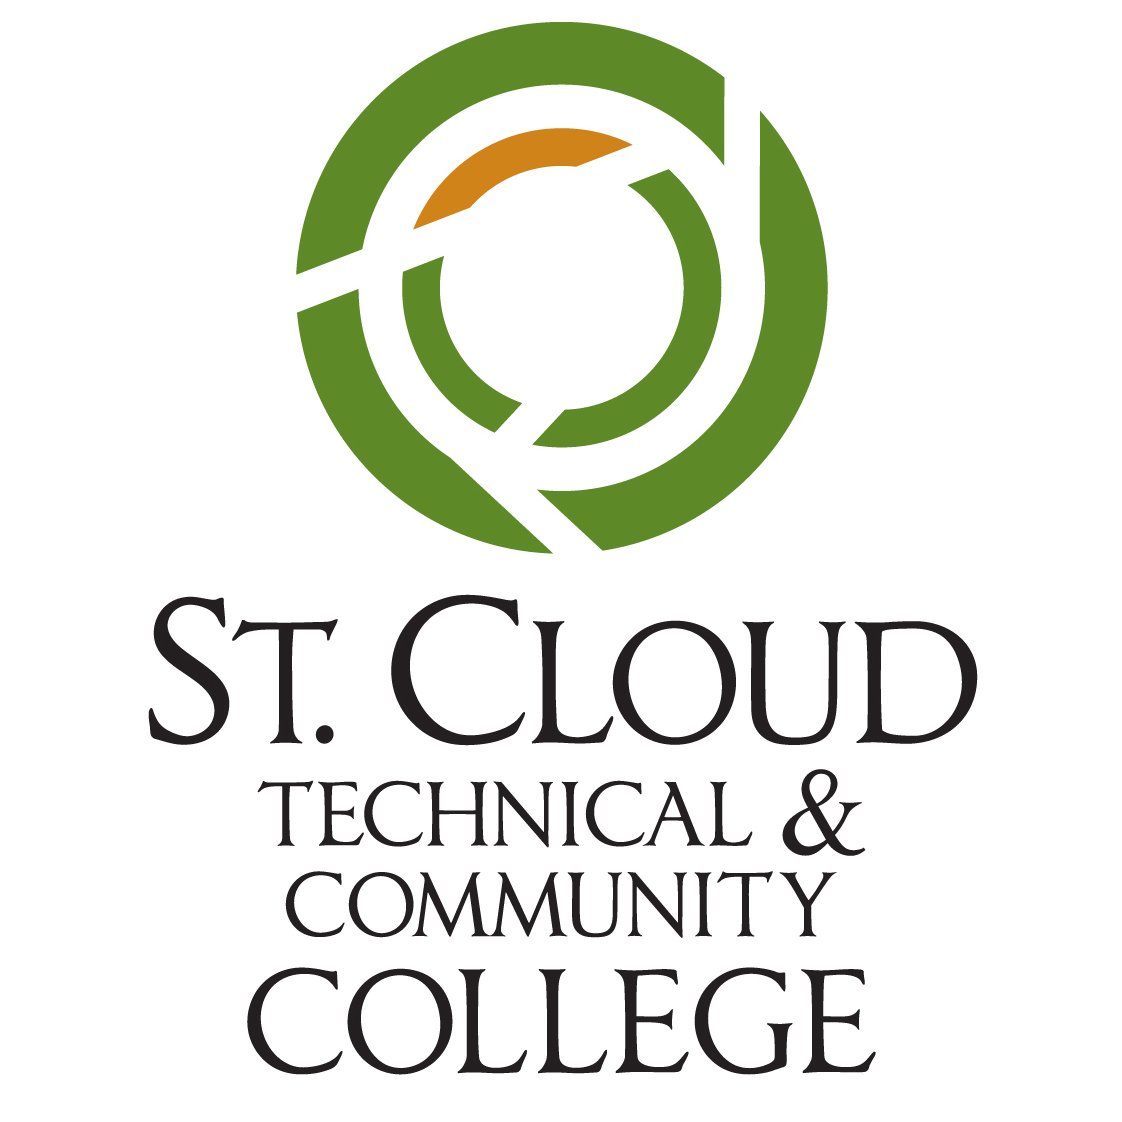 Adjunct instructor at St. Cloud Technical and Community College.